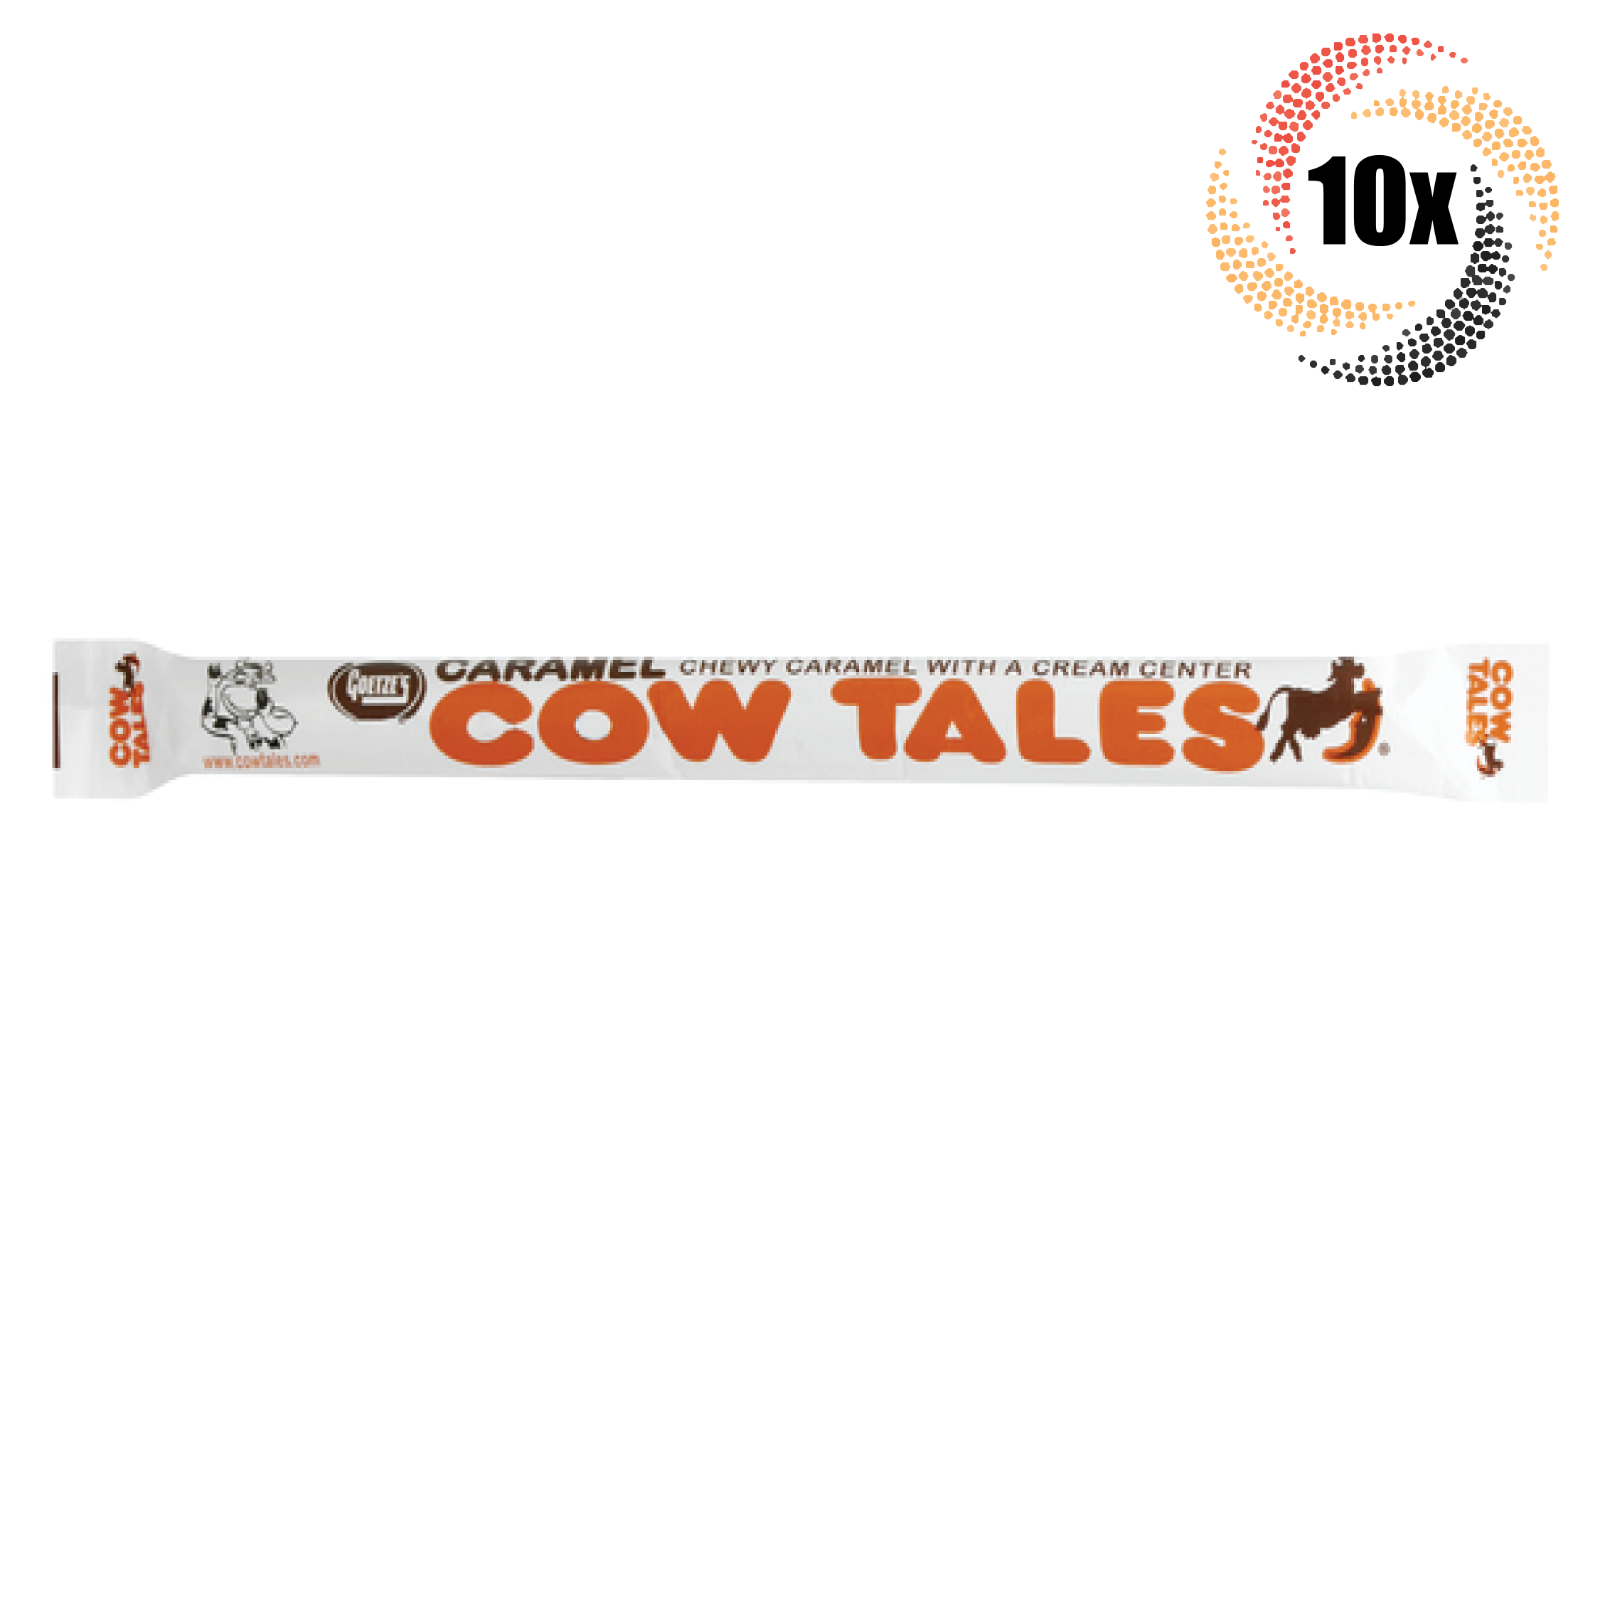 10x Pieces Goatze Chewy Vanilla Caramel Cream Center Cowtales | Fast Shipping - $10.01